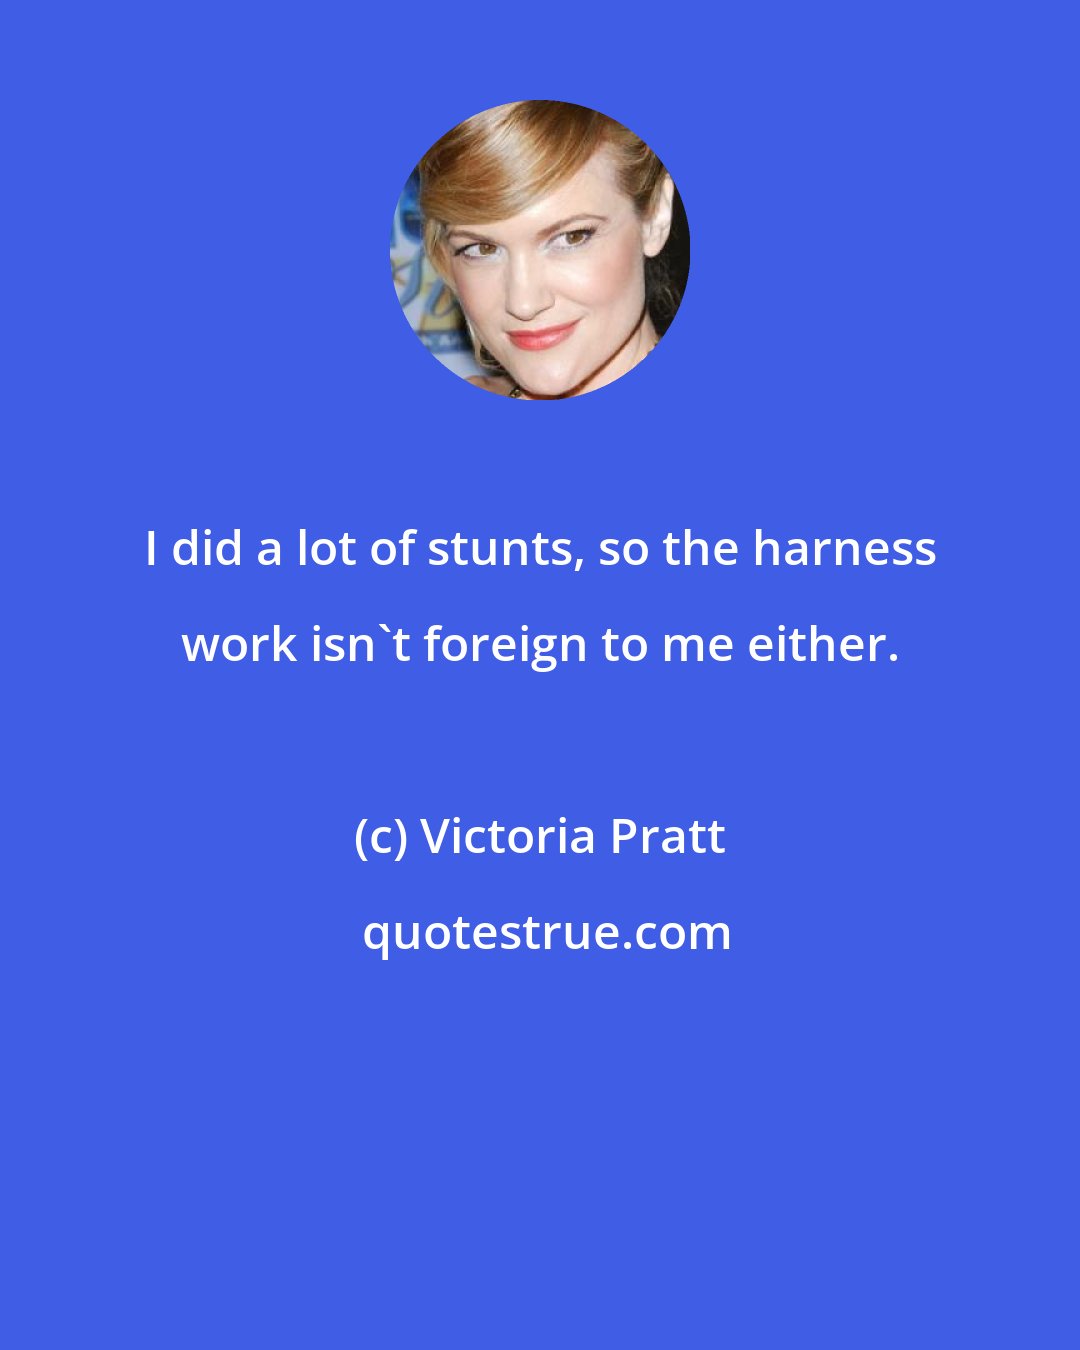 Victoria Pratt: I did a lot of stunts, so the harness work isn't foreign to me either.